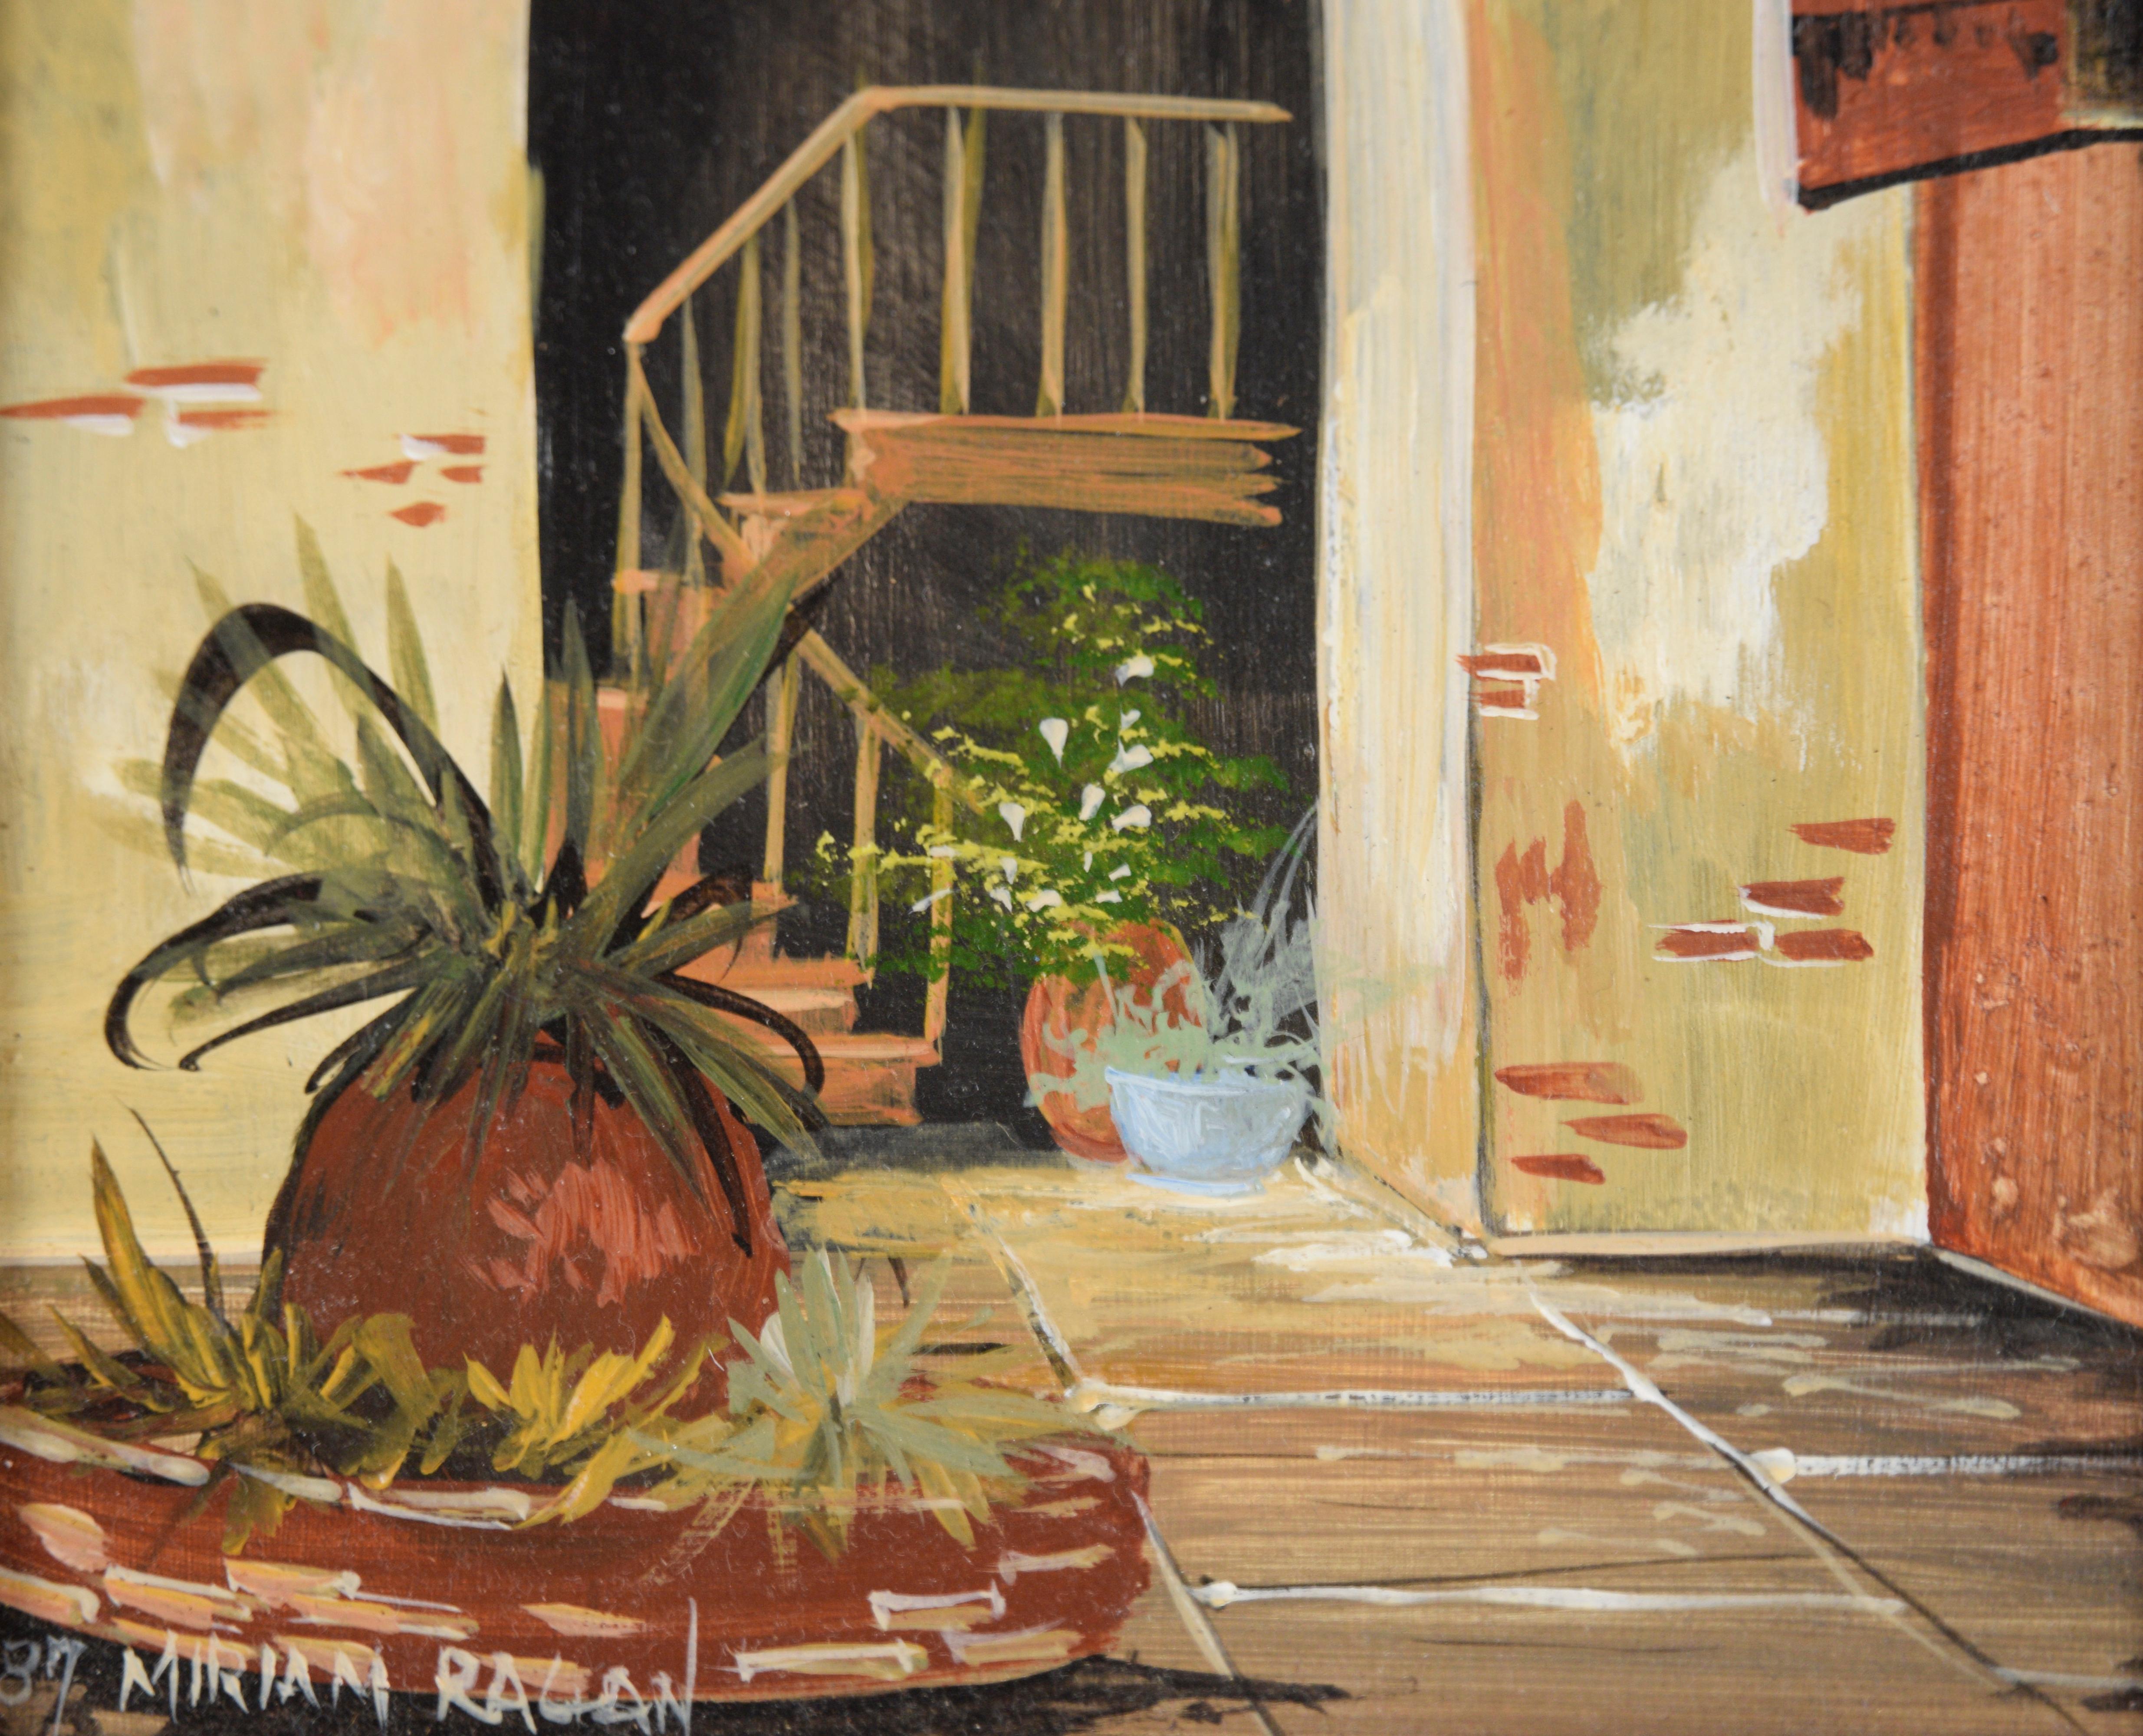 The Staircase - The French Quarter - New Orleans Original Oil on Masonite - American Impressionist Painting by Miriam Ragan